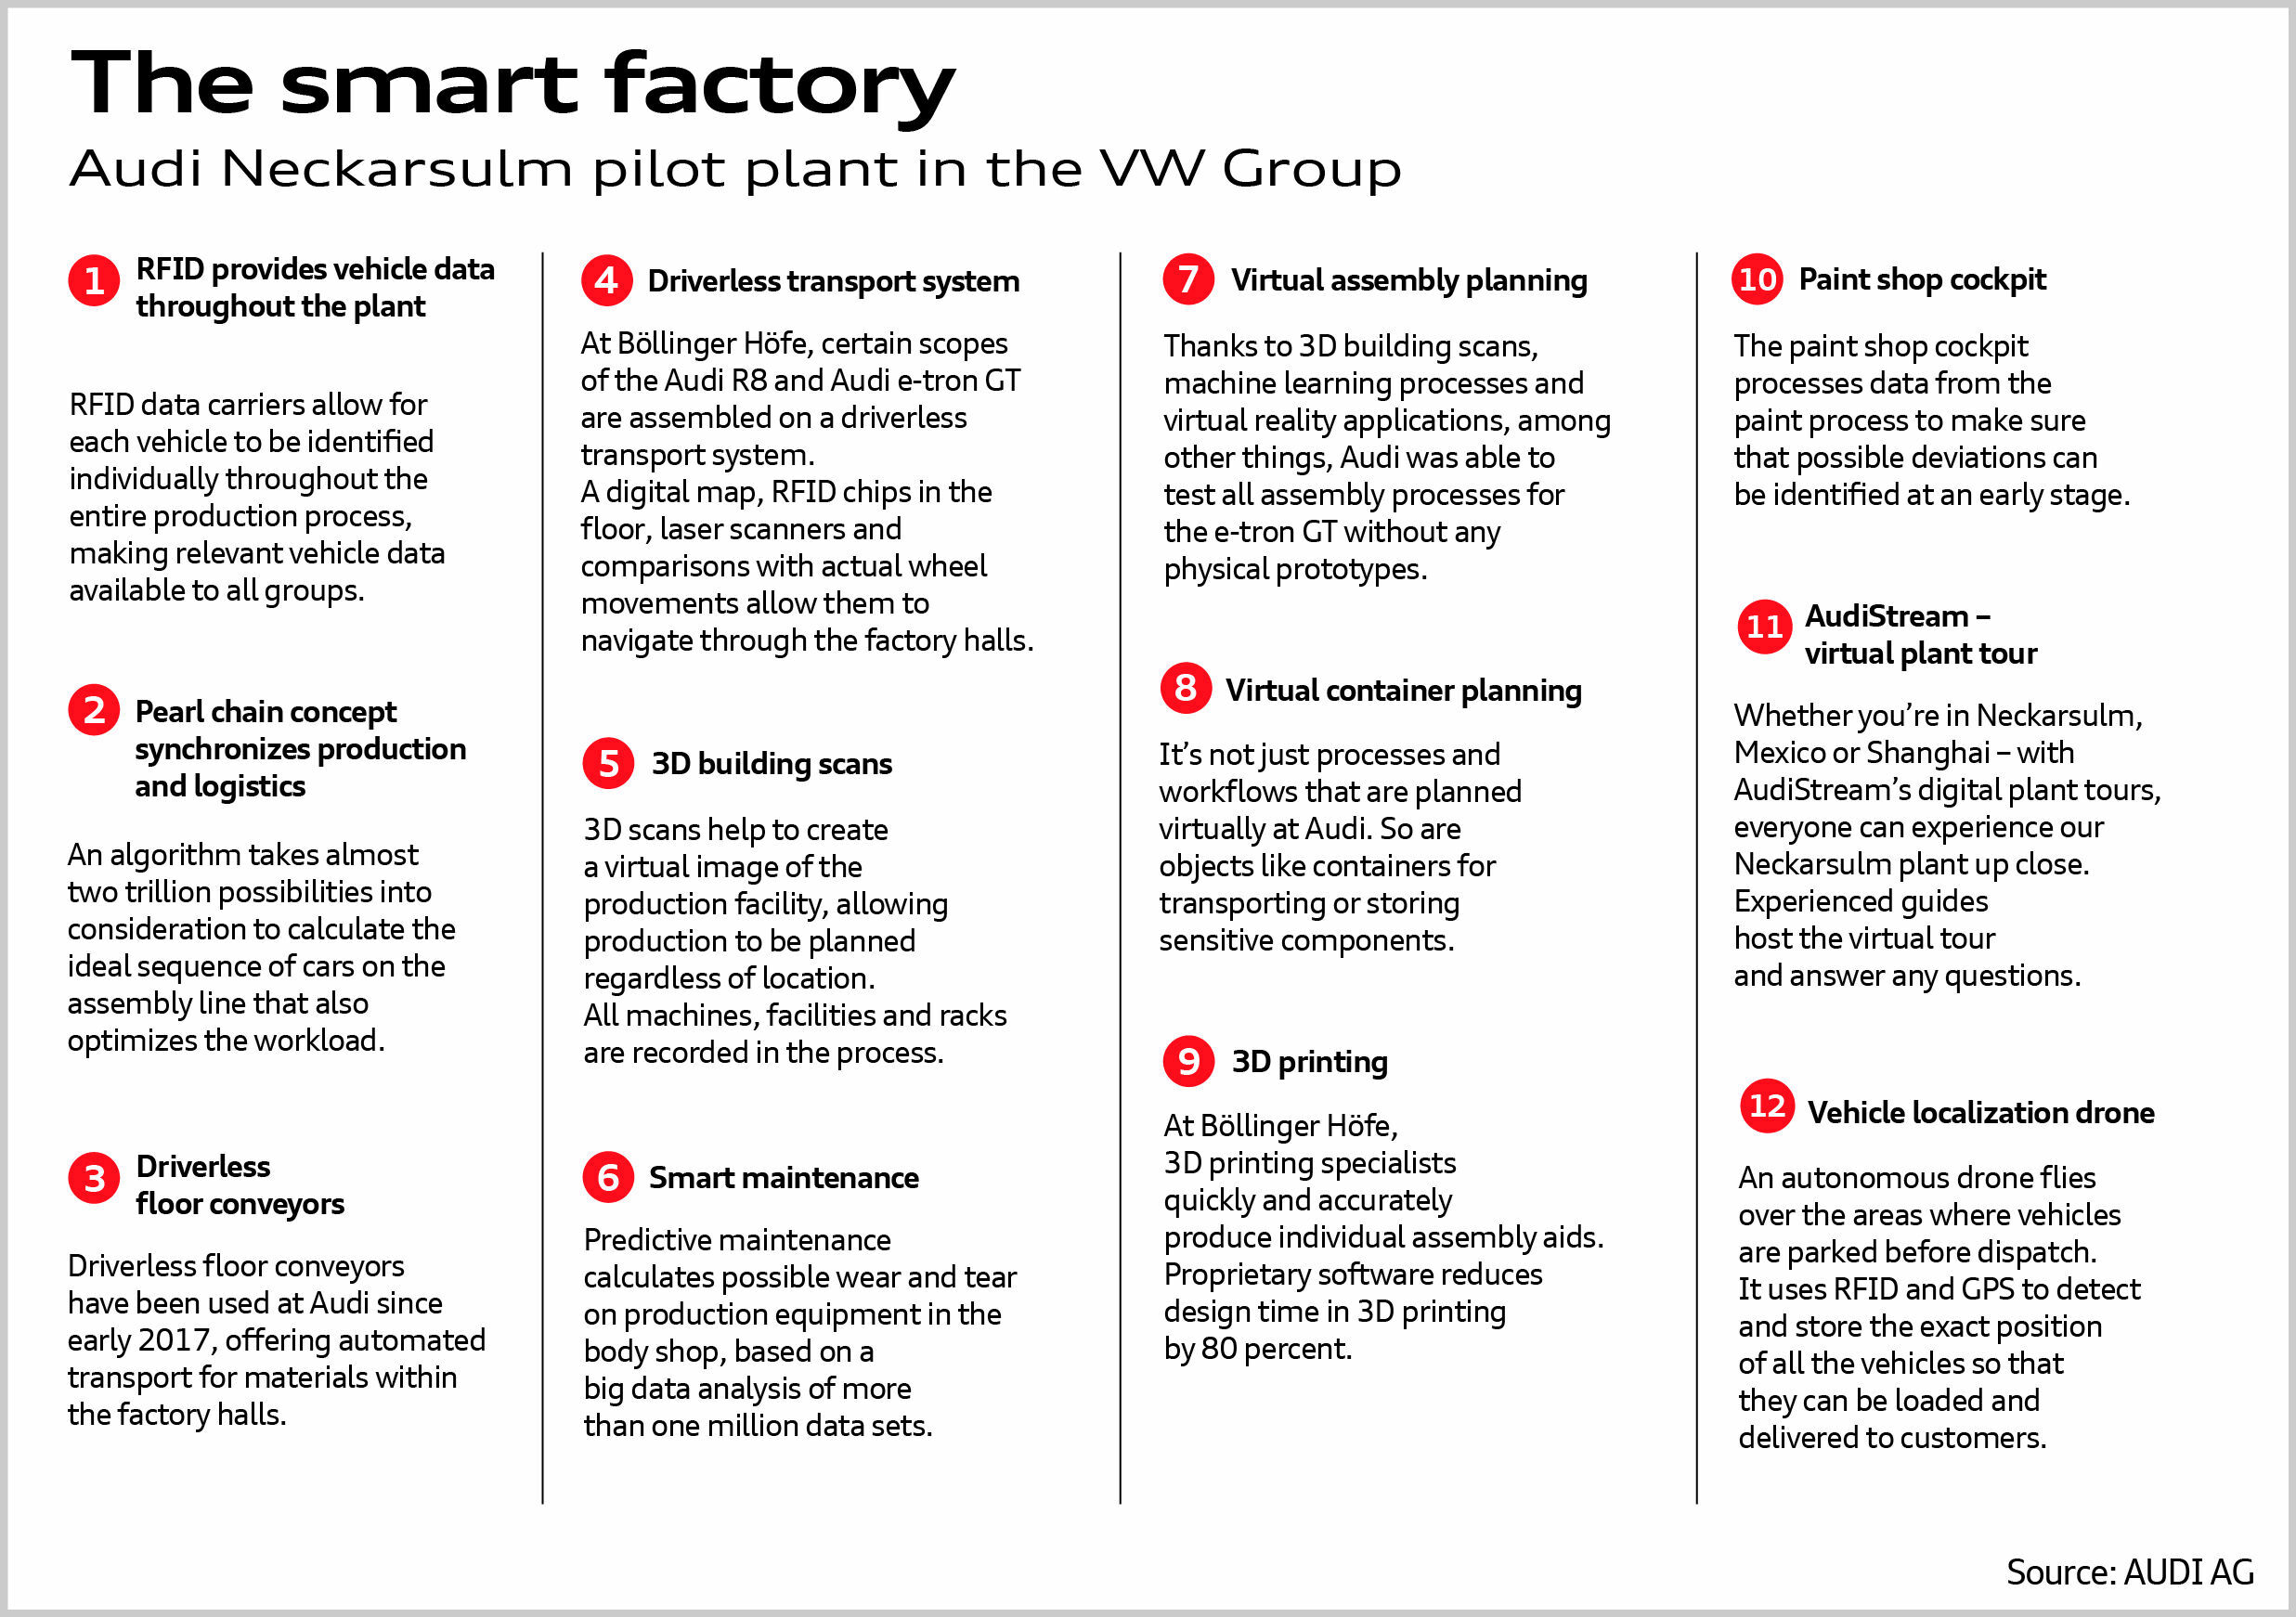 The smart factory - overview